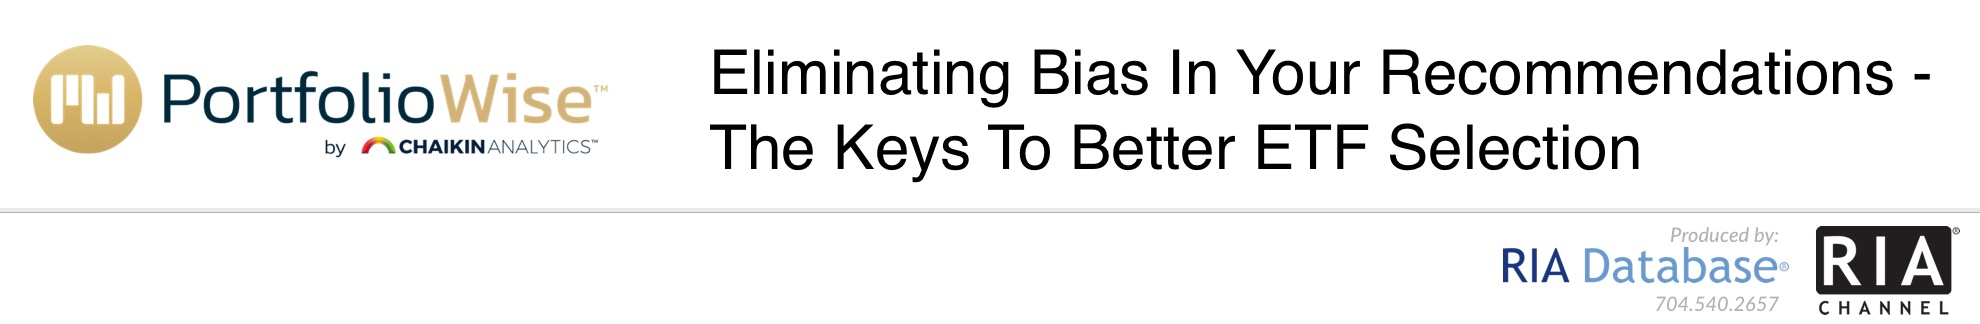 Eliminating Bias In Your Recommendations - The Keys To Better ETF Selection